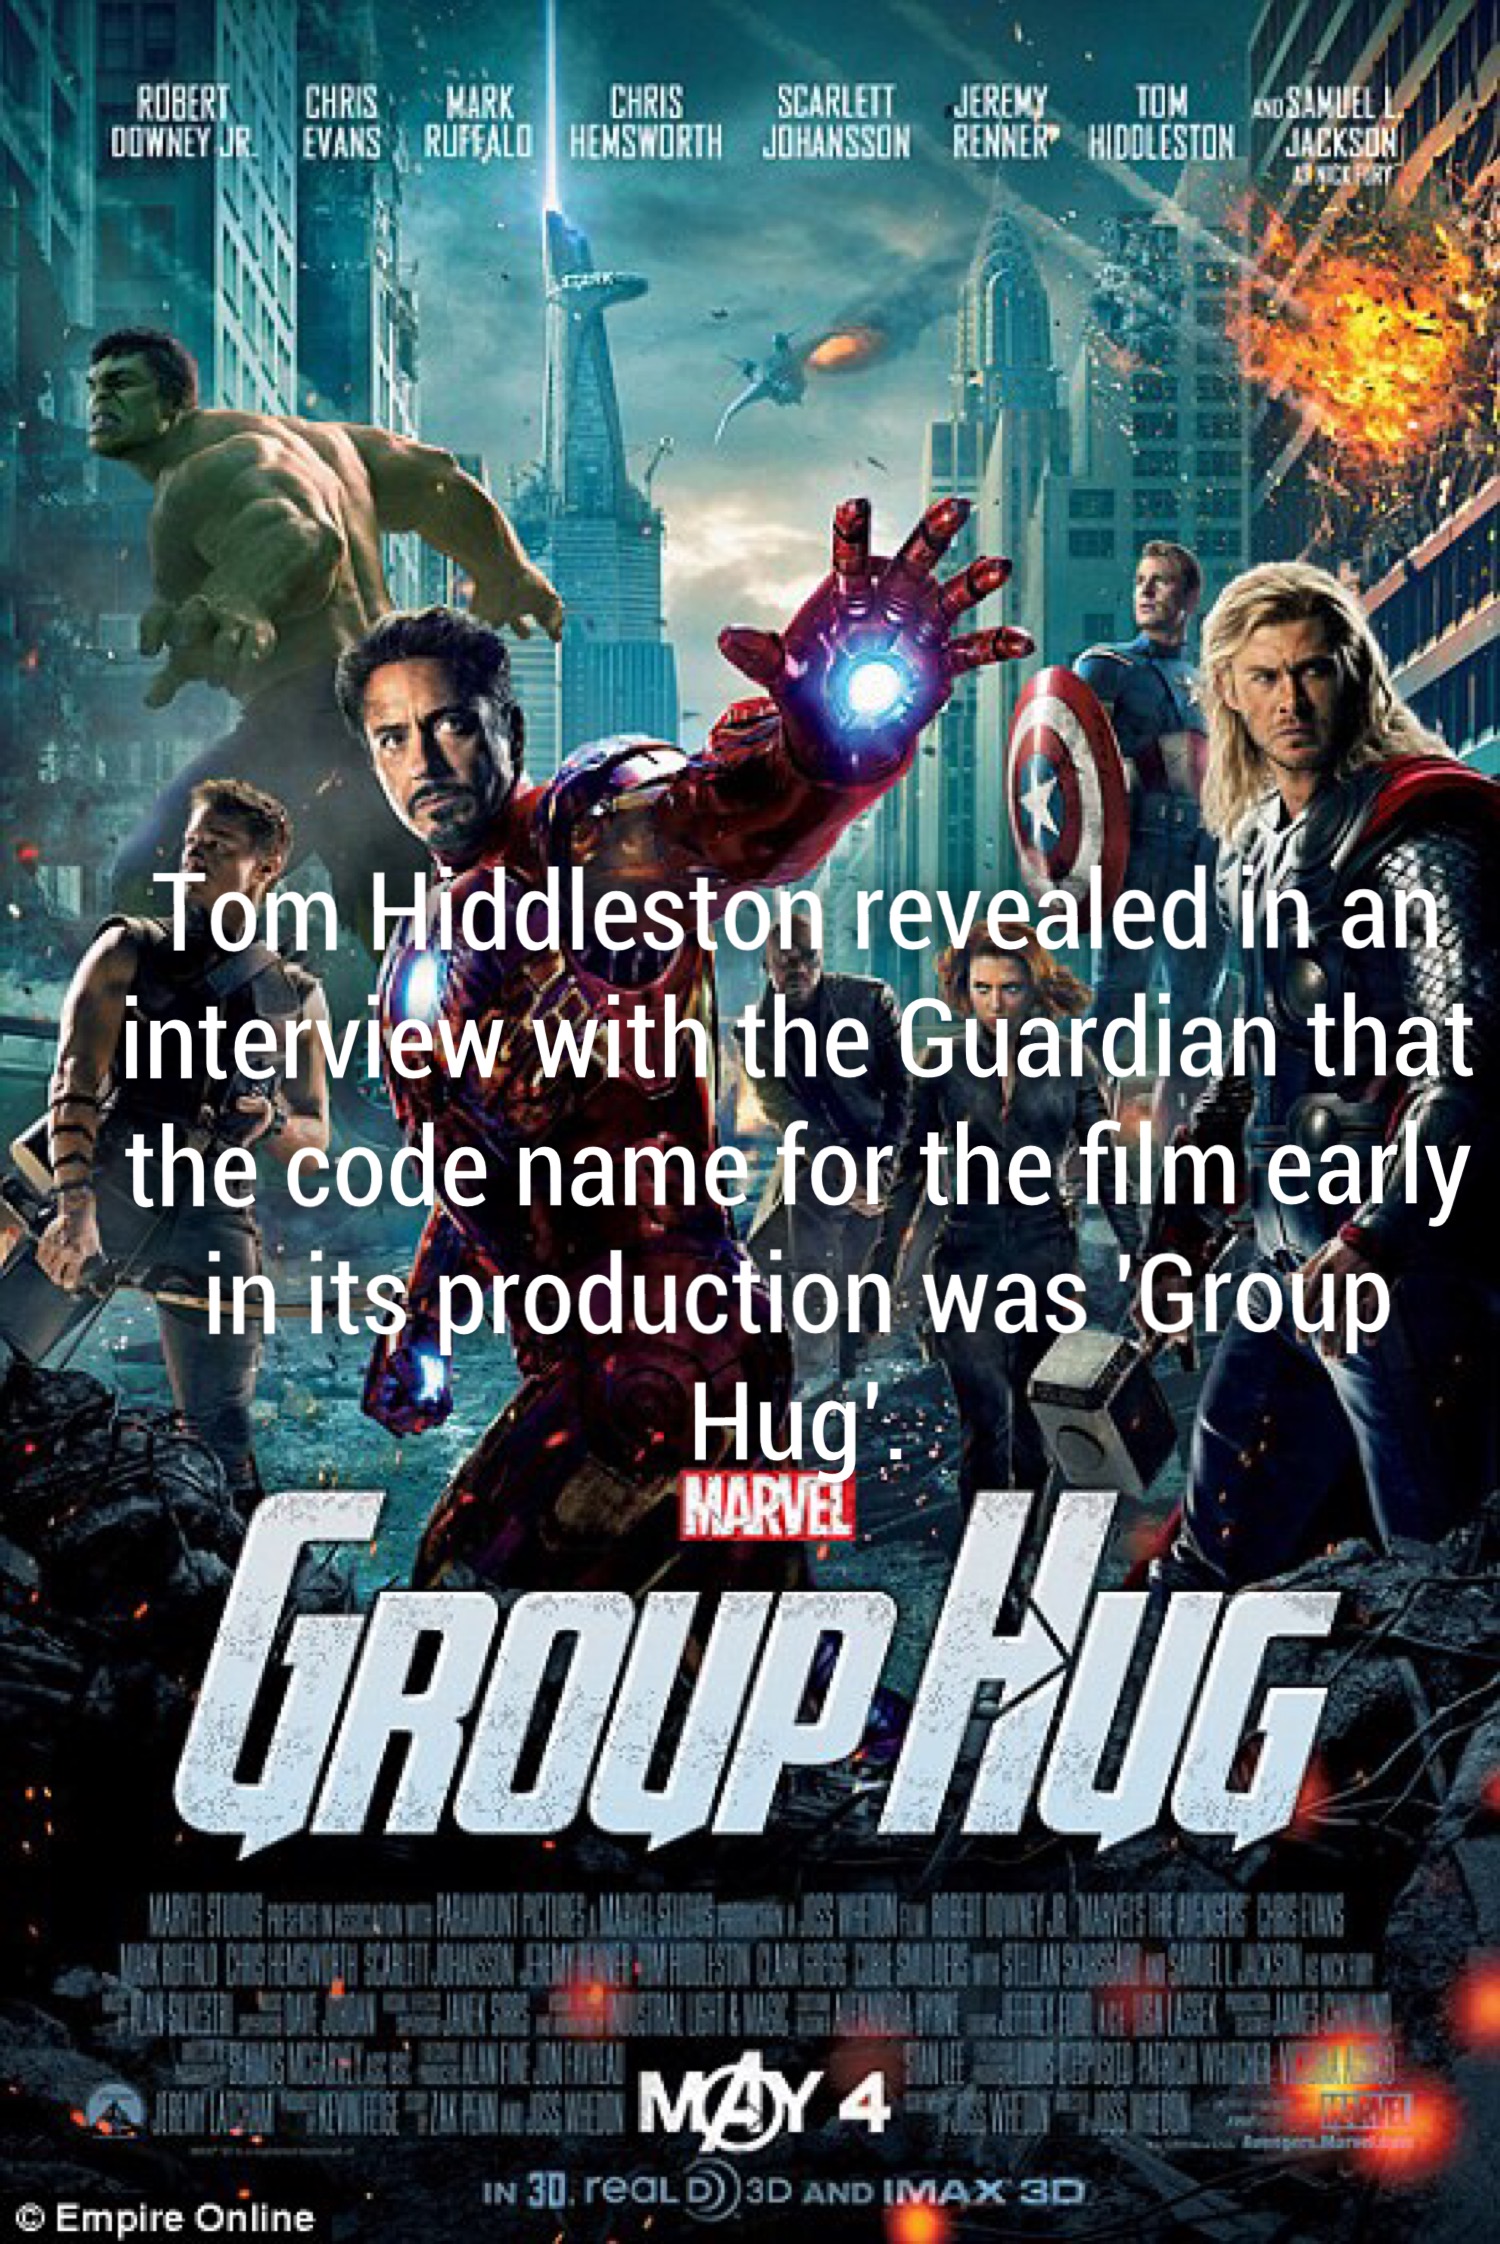 avengers true facts - Pescarsnipechas Ederia Scarlett Transsen Jeremy Benne In Adolescen Same T E internet biddleston Tom Hiddleston revealed in an interview with the Guardian that the code name for the film early in its production was 'Group Hug'. Marvel